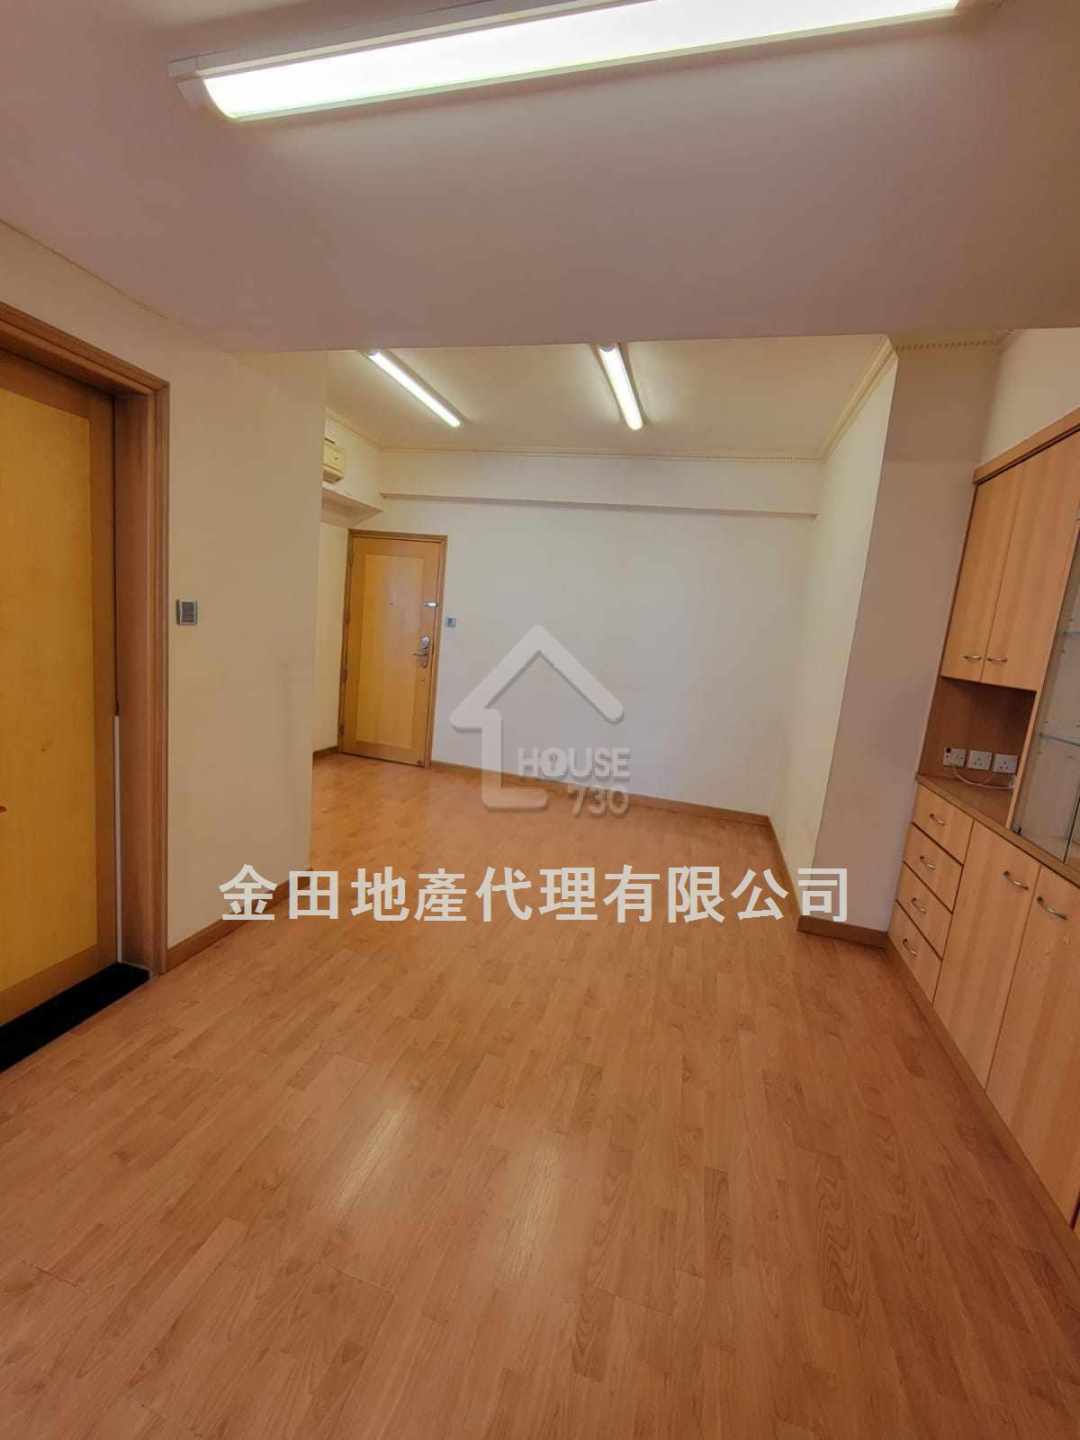 Wan Chai KWONG SANG HONG BUILDING Middle Floor Dining Room House730-6282601